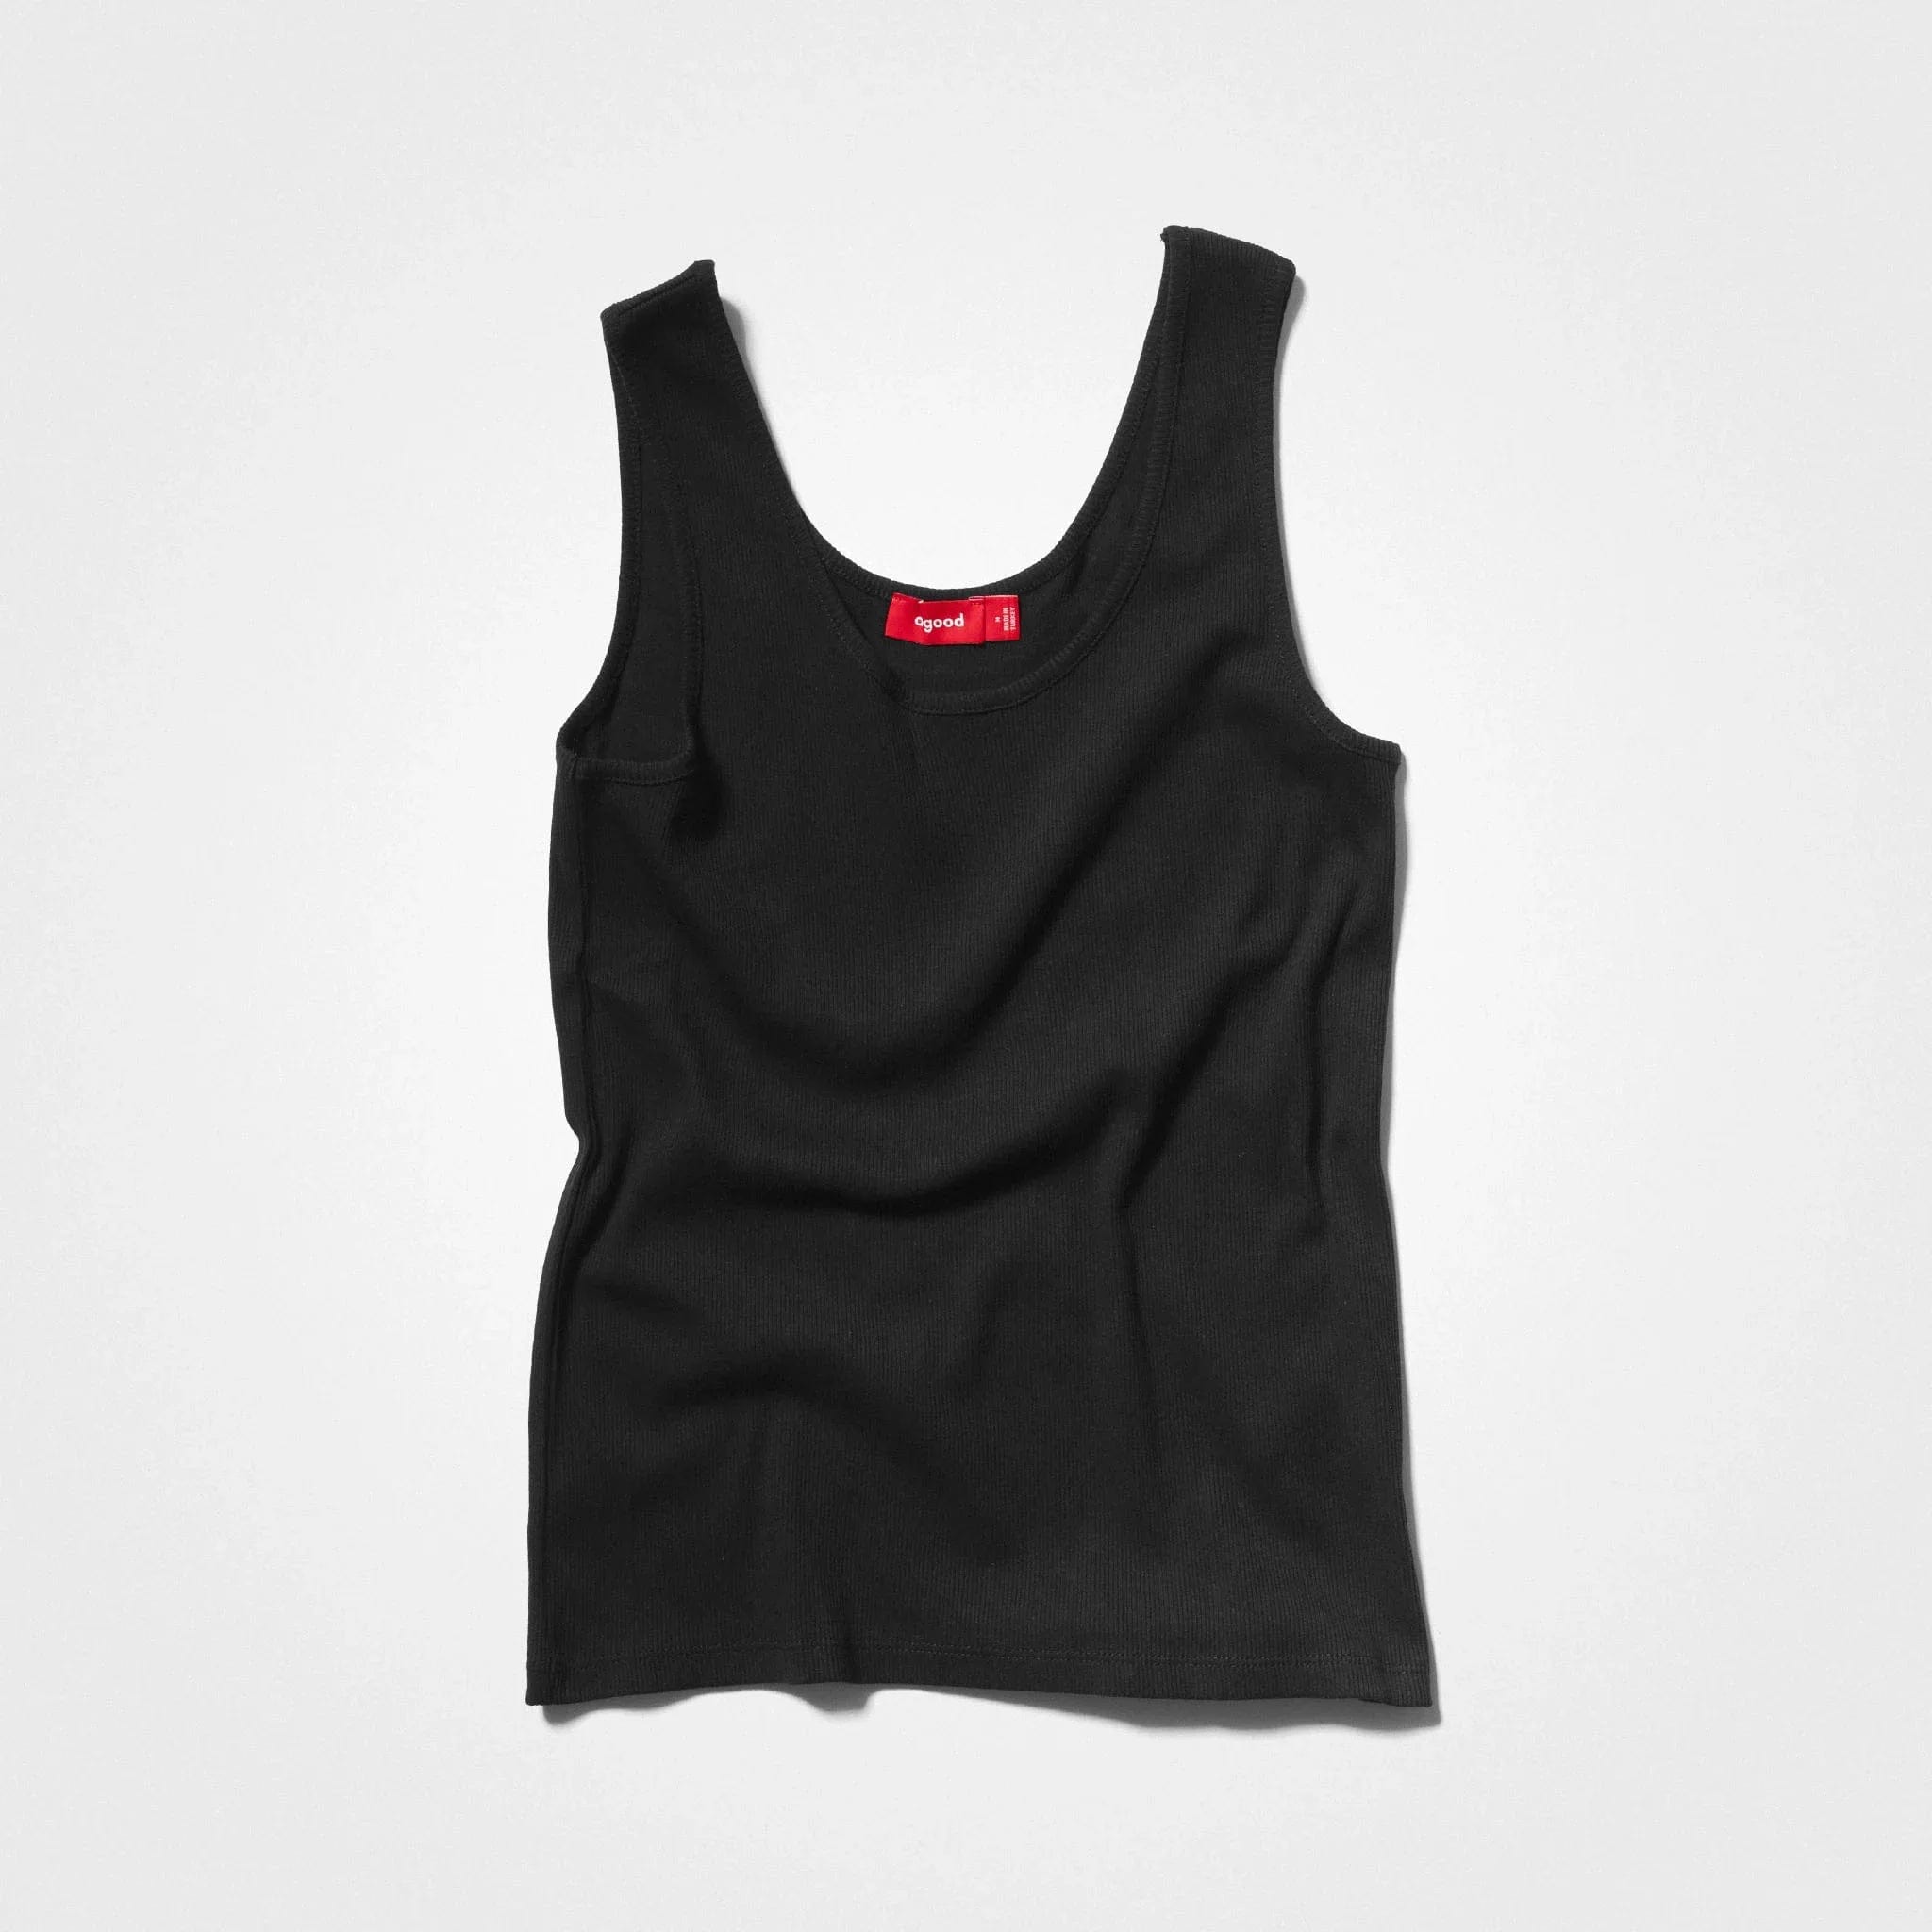 Women's Recycled Cotton Tank Top—black